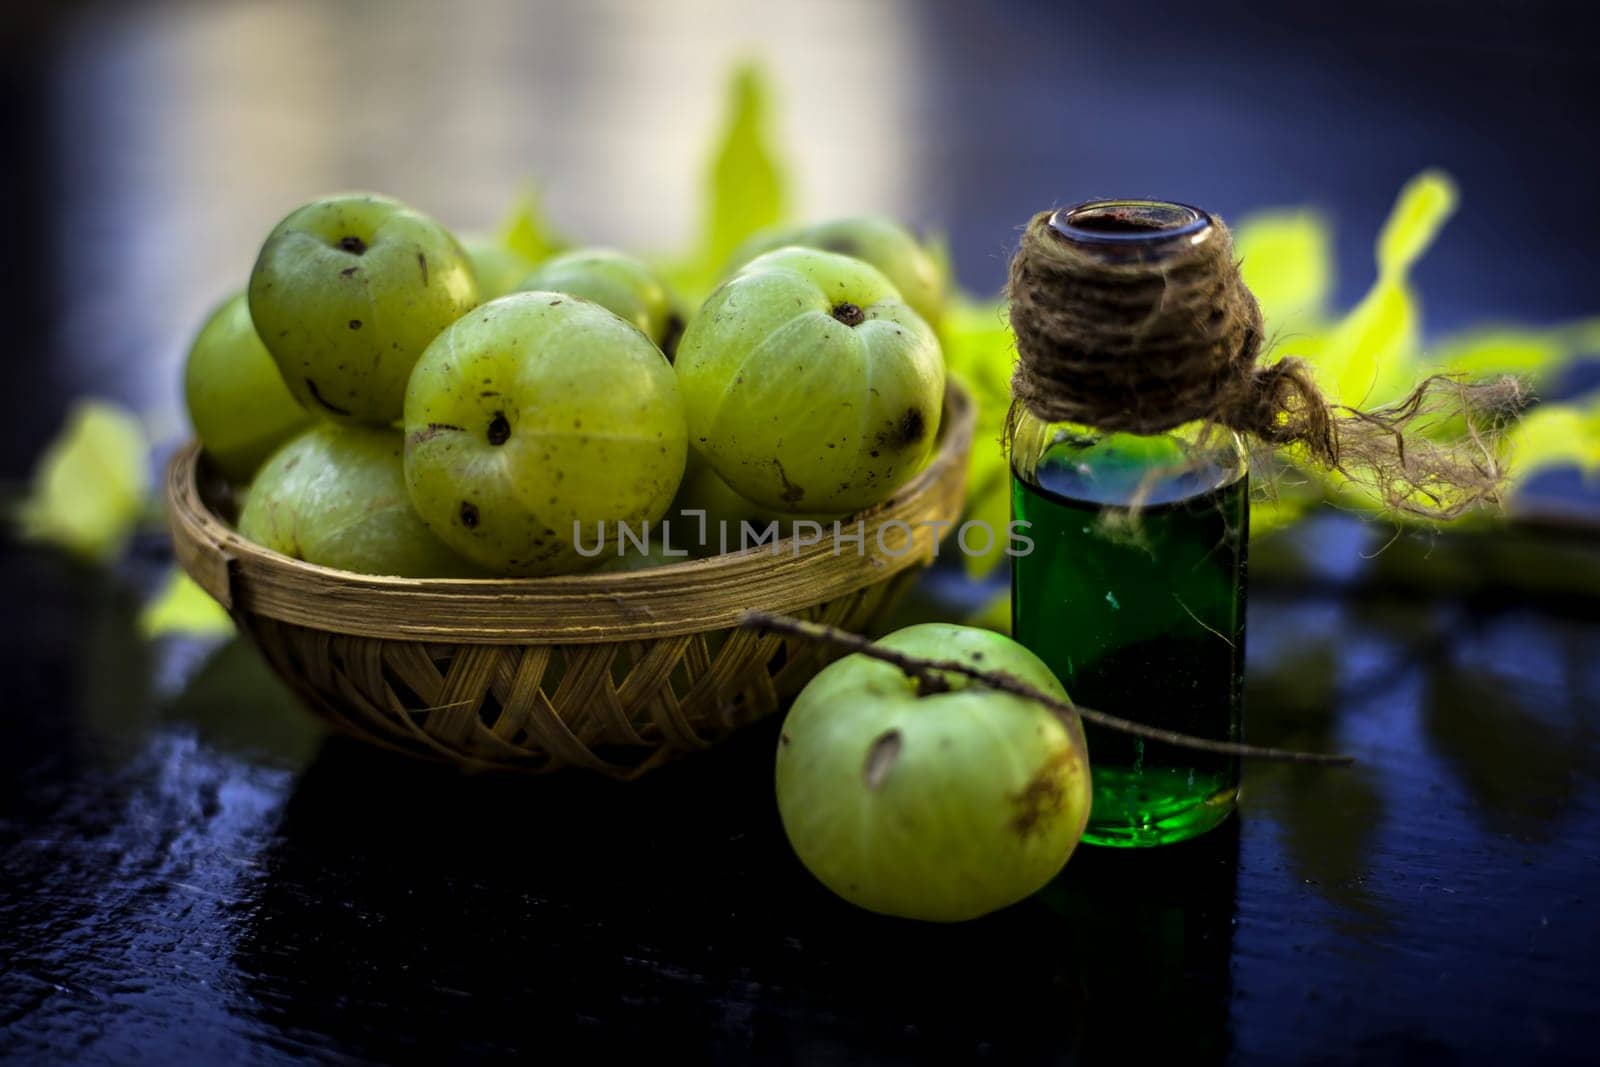 Close-up of Indian gooseberry with its extracted essence or concentration in a transparent bottle on a wooden surface with raw amla in a fruit and vegetable basket. by mirzamlk